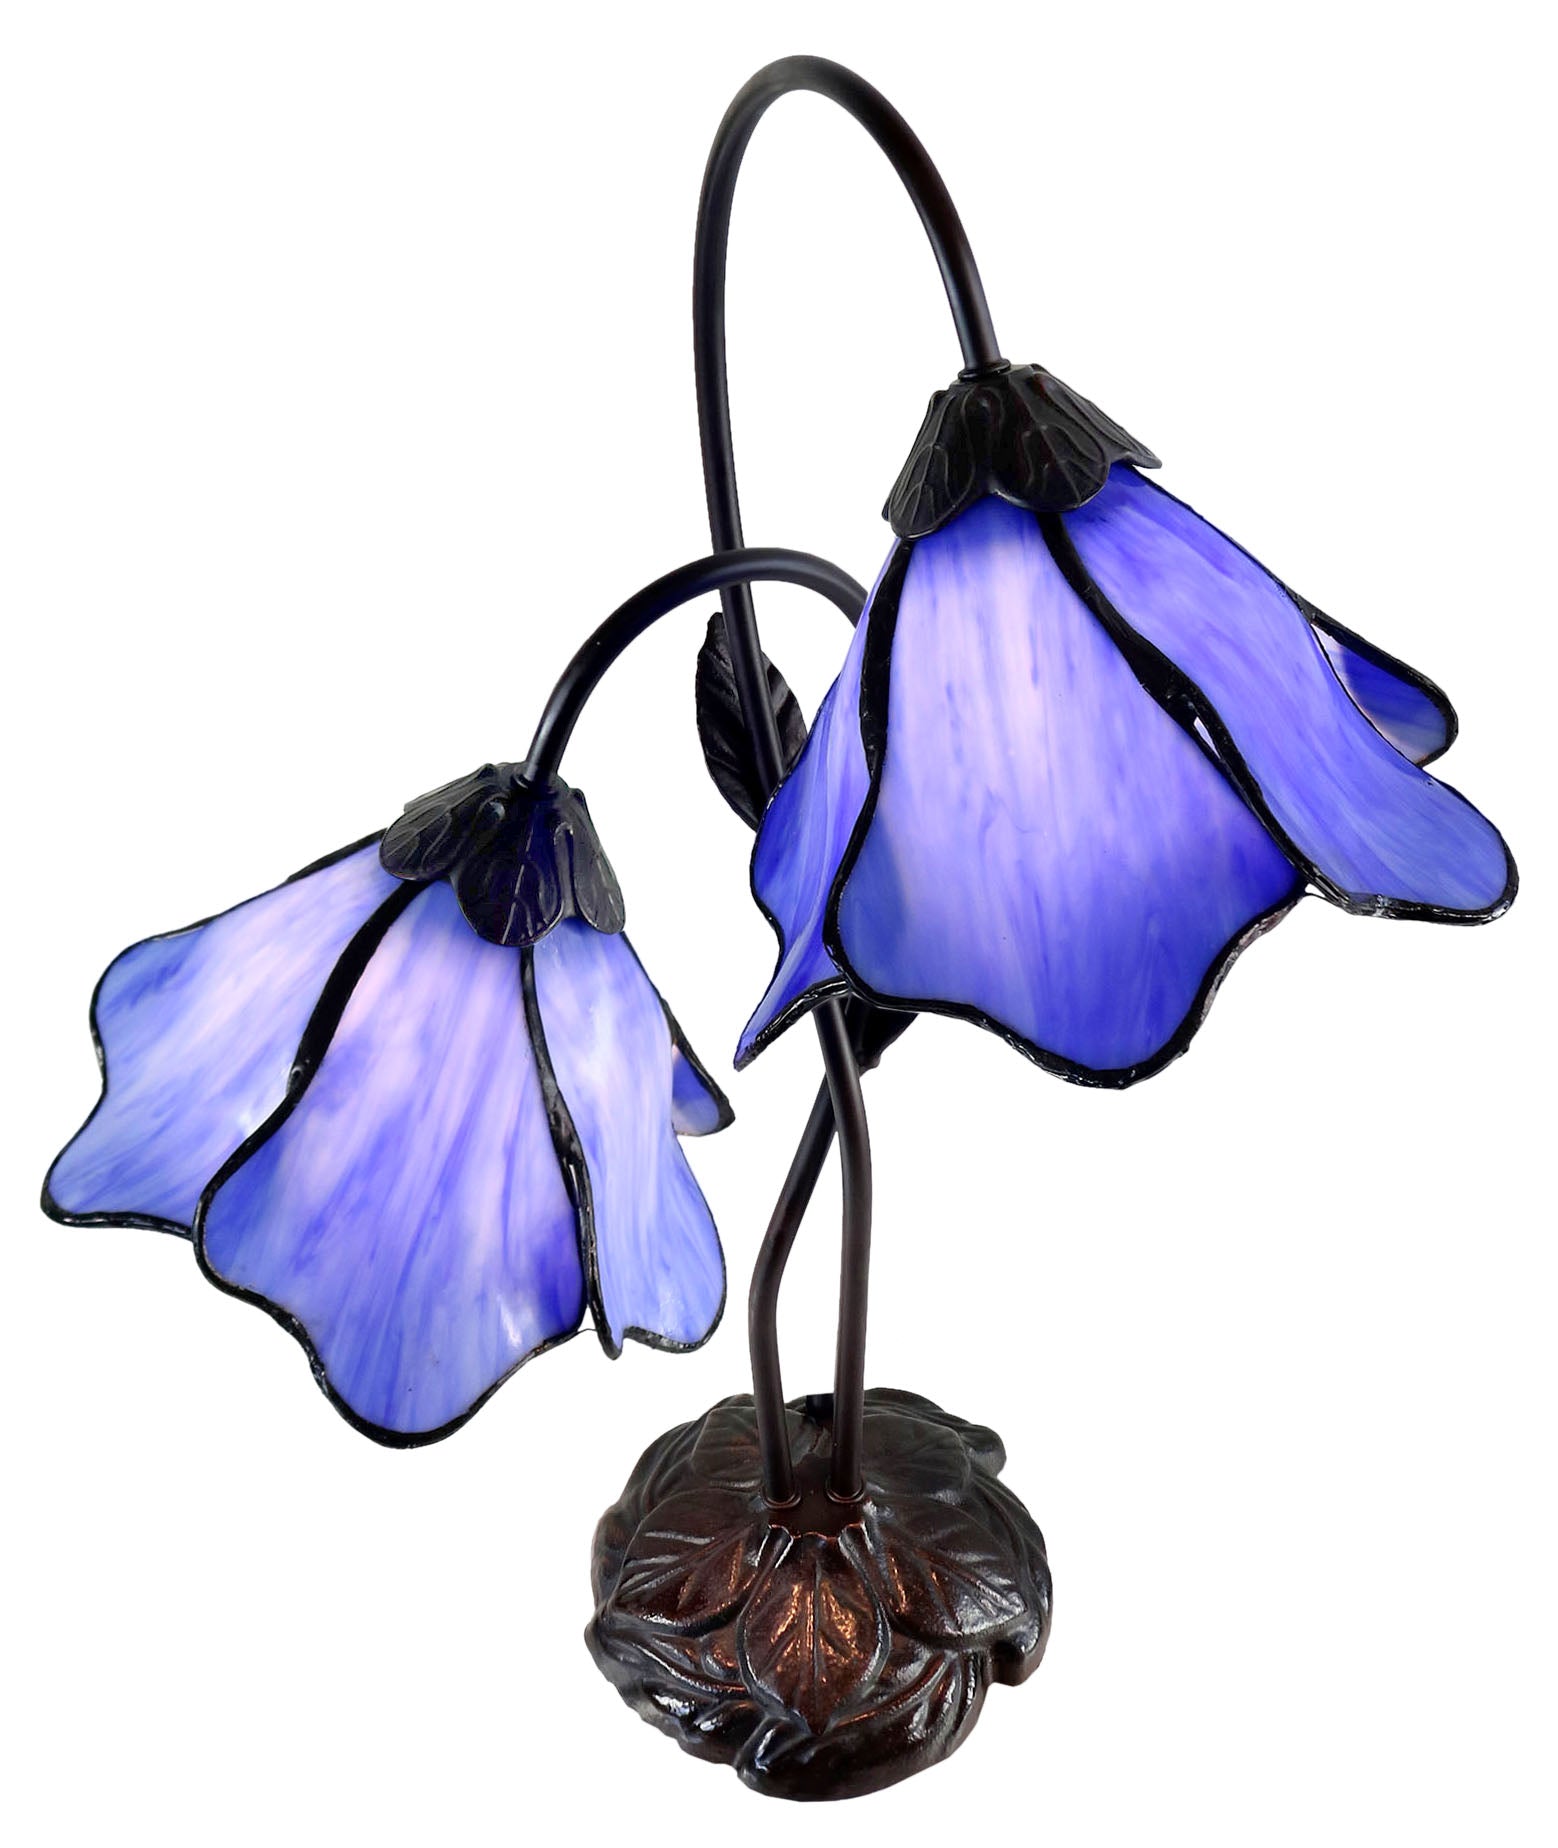 Double Lamp shade Flower  Water Lily Style Tiffany Table Lamp*blue